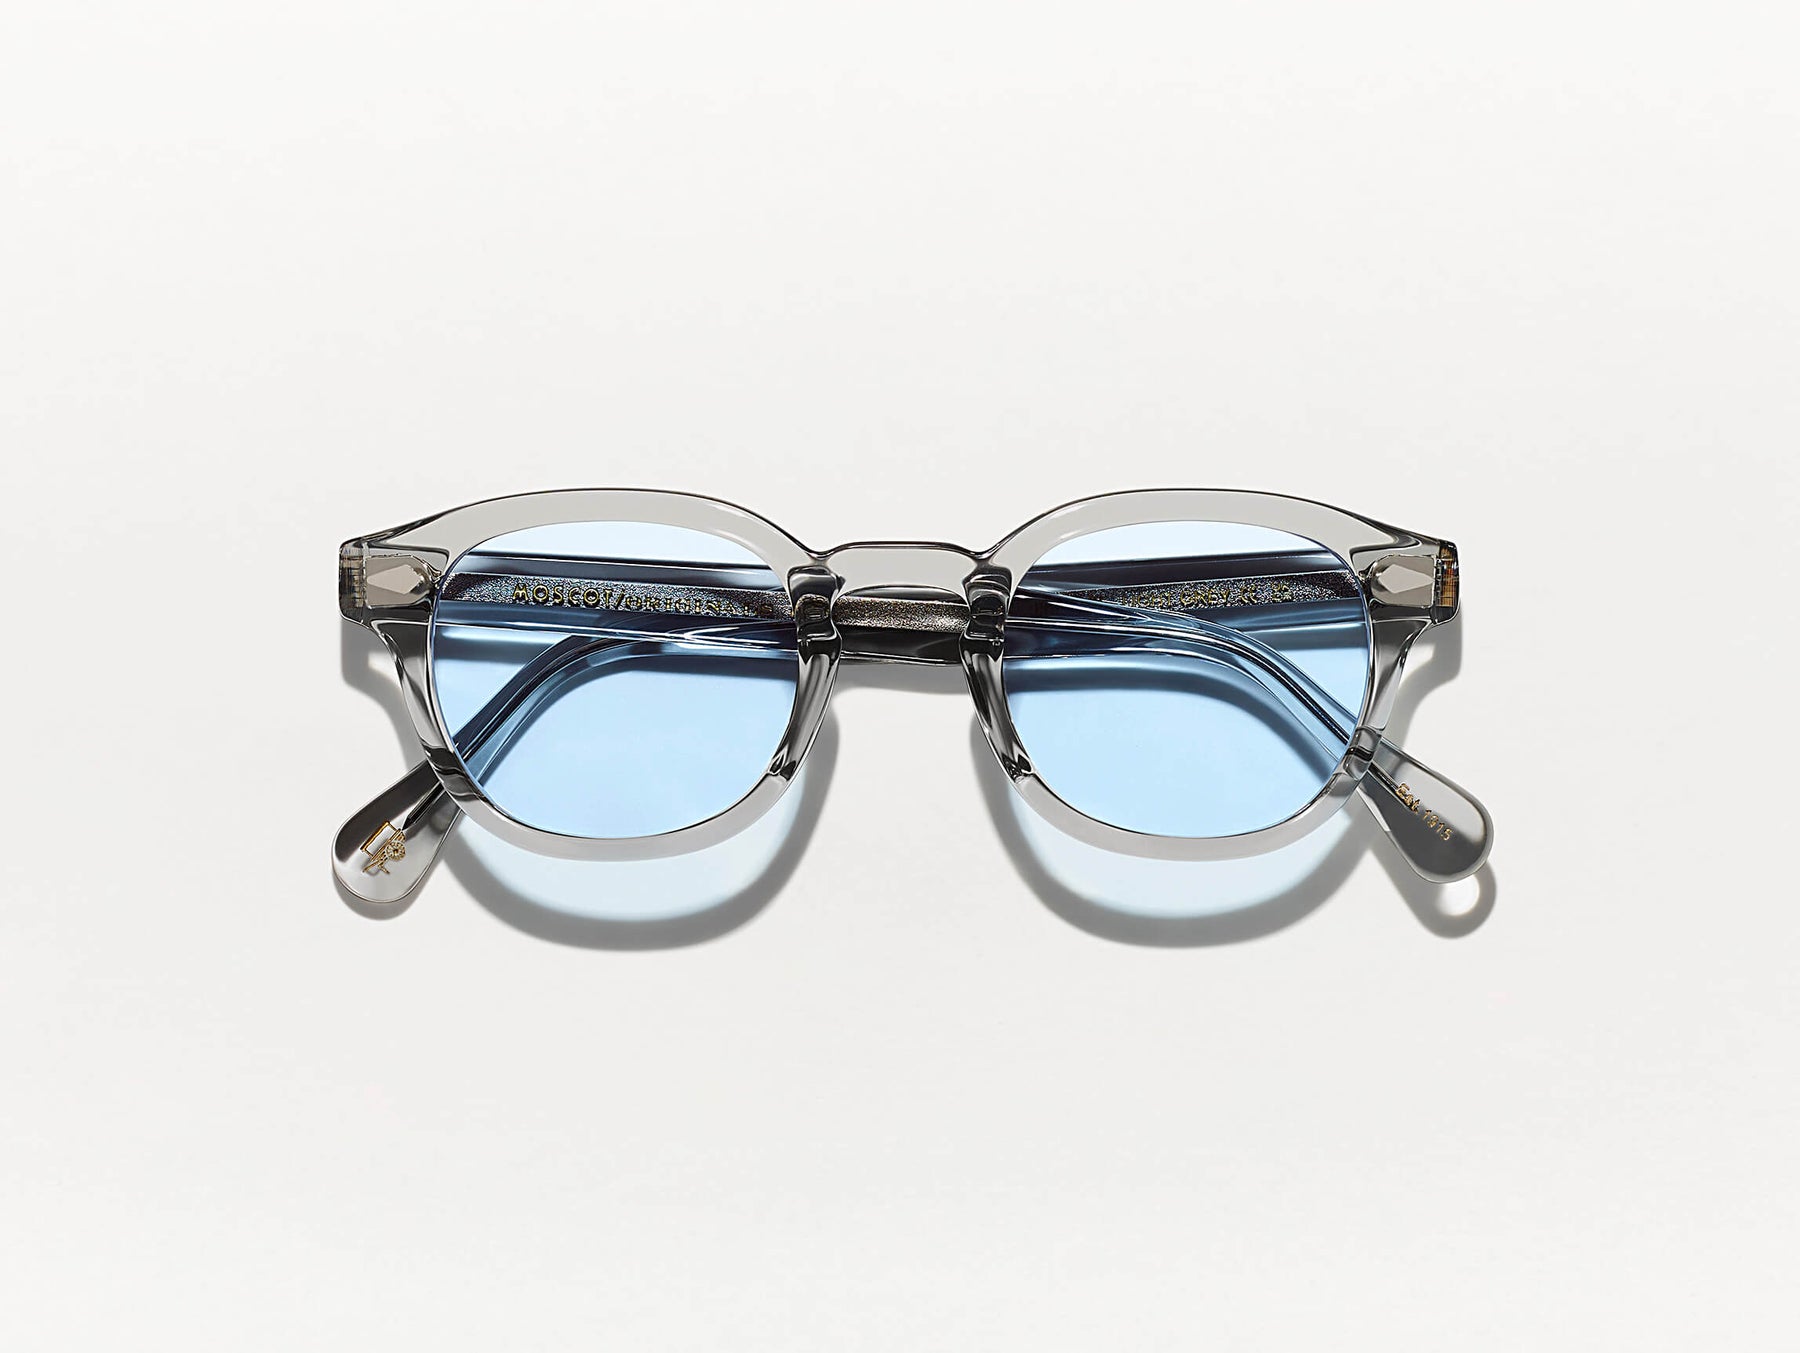 The LEMTOSH Pastel with Bel Air Blue Tinted Lenses